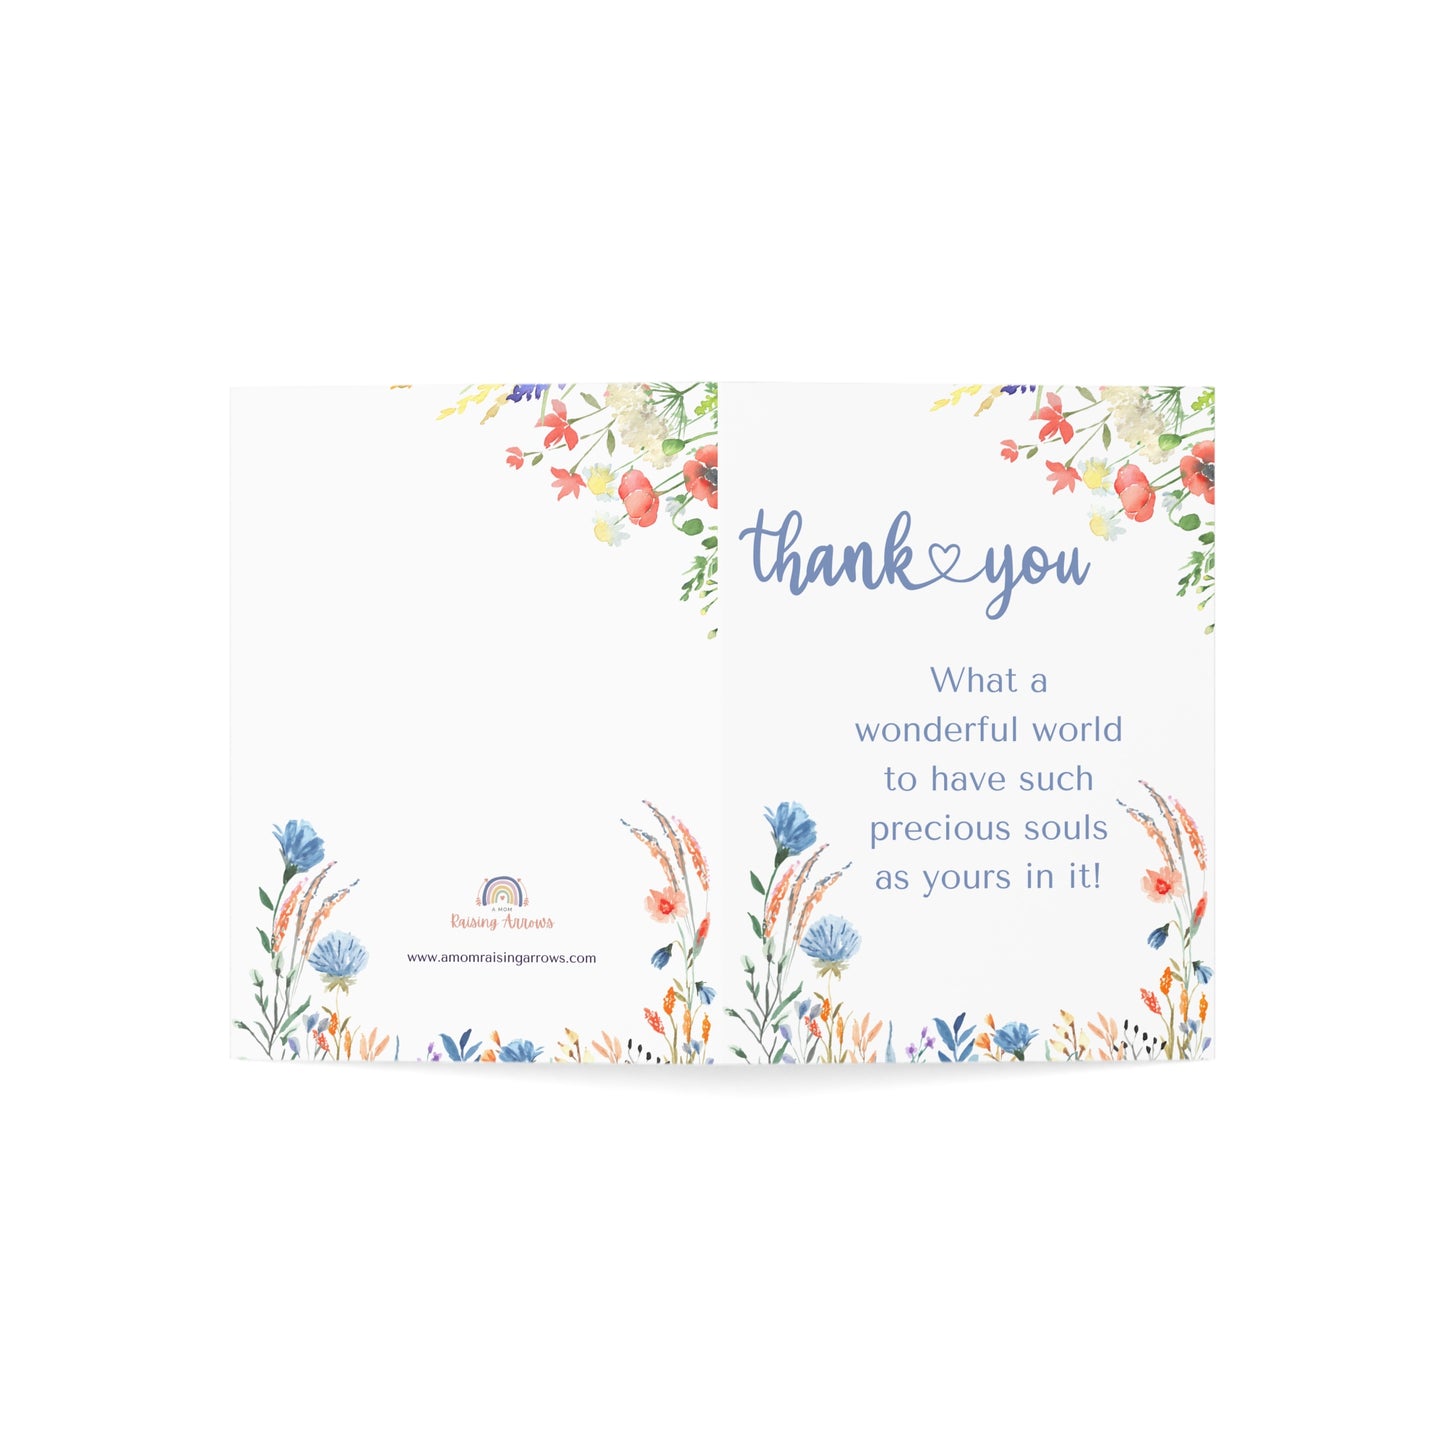 Thank you card floral